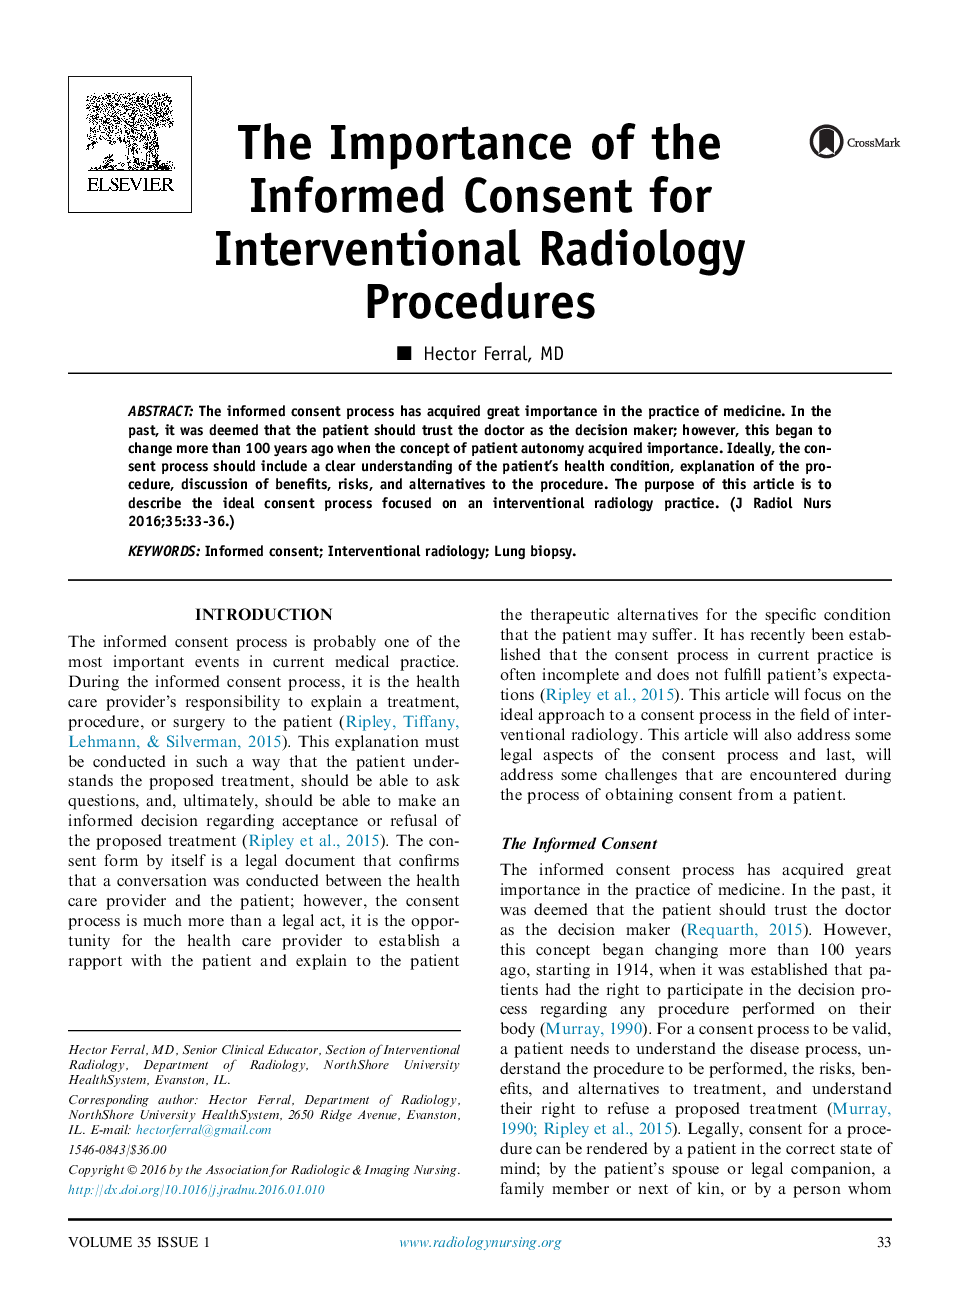 The Importance of the Informed Consent for Interventional Radiology Procedures